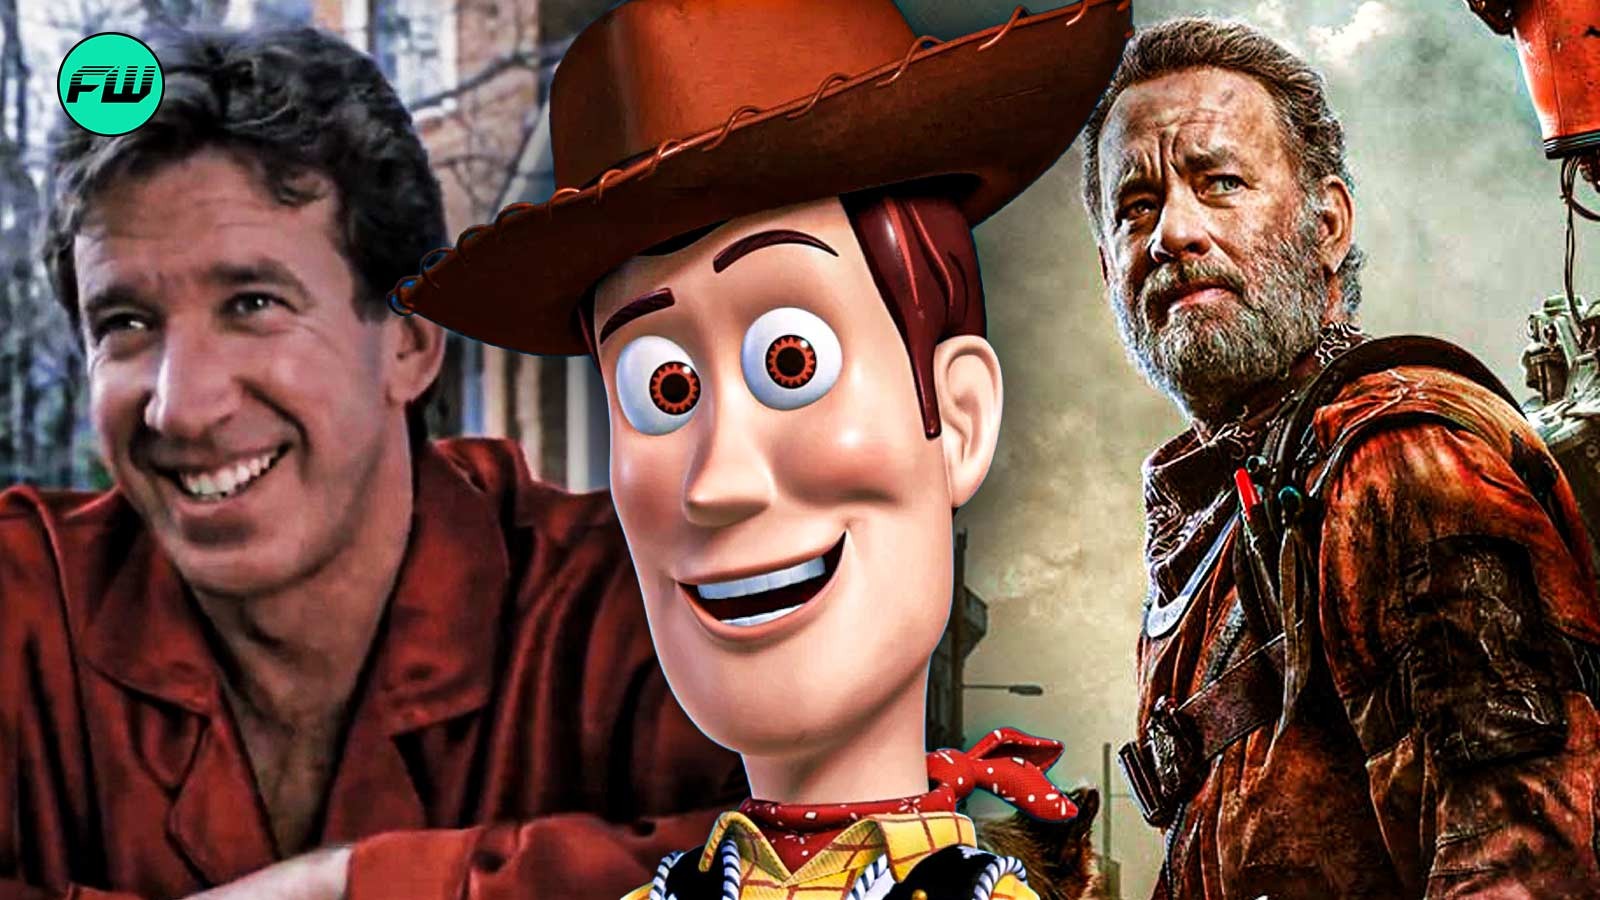 Tim Allen’s priceless reaction to Tom Hanks screaming during the voice recording of “Toy Story” will bring back childhood memories